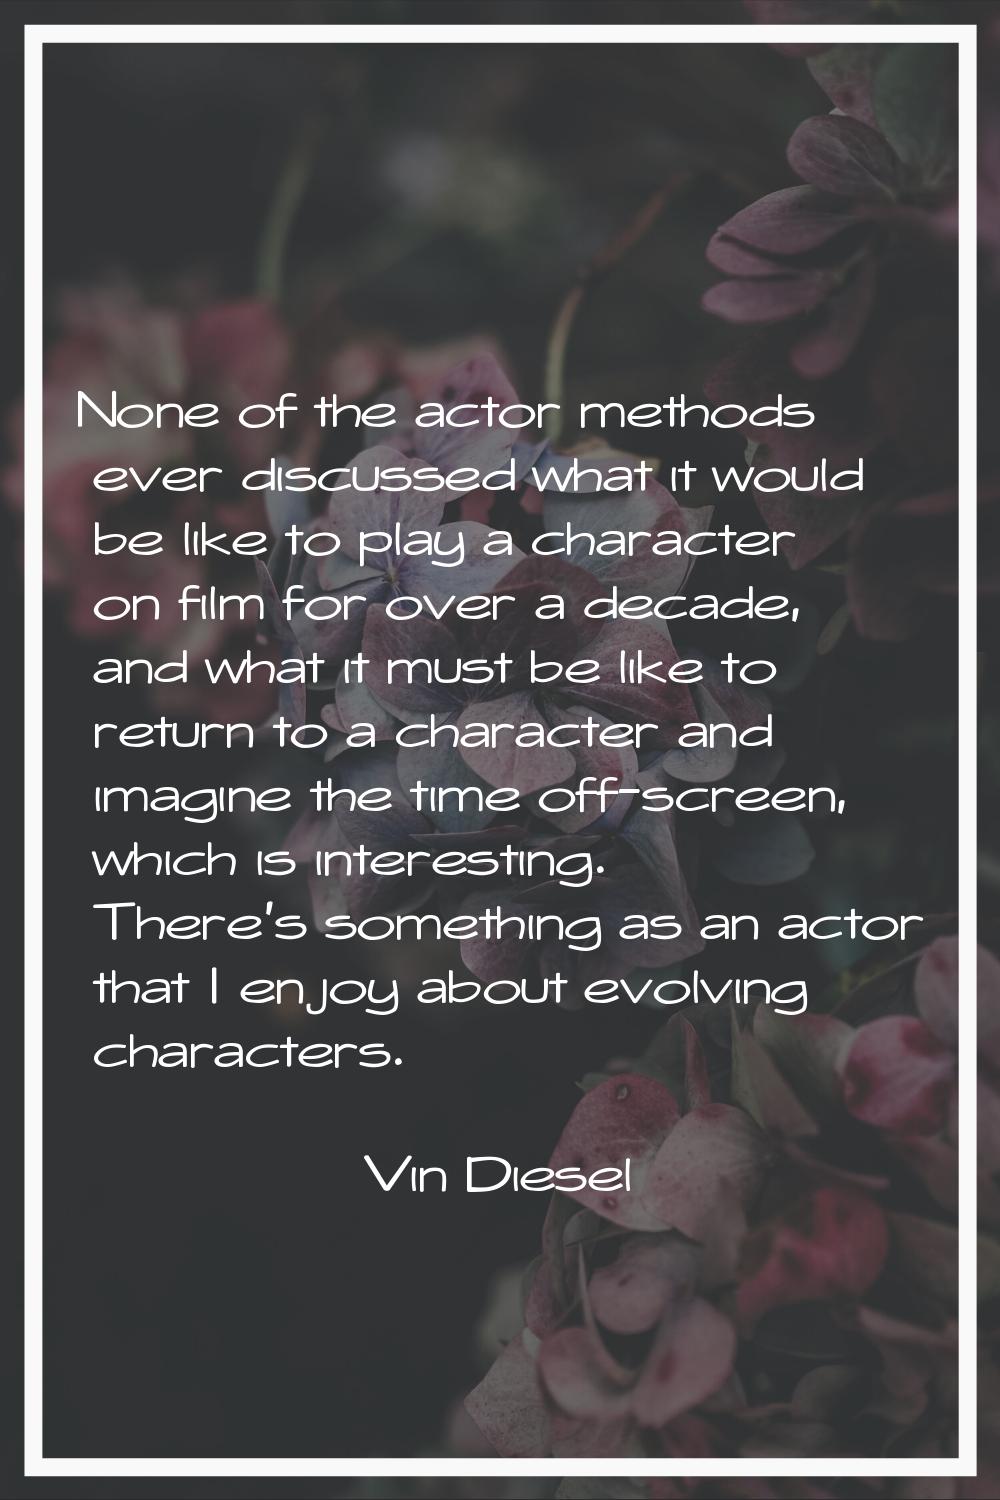 None of the actor methods ever discussed what it would be like to play a character on film for over